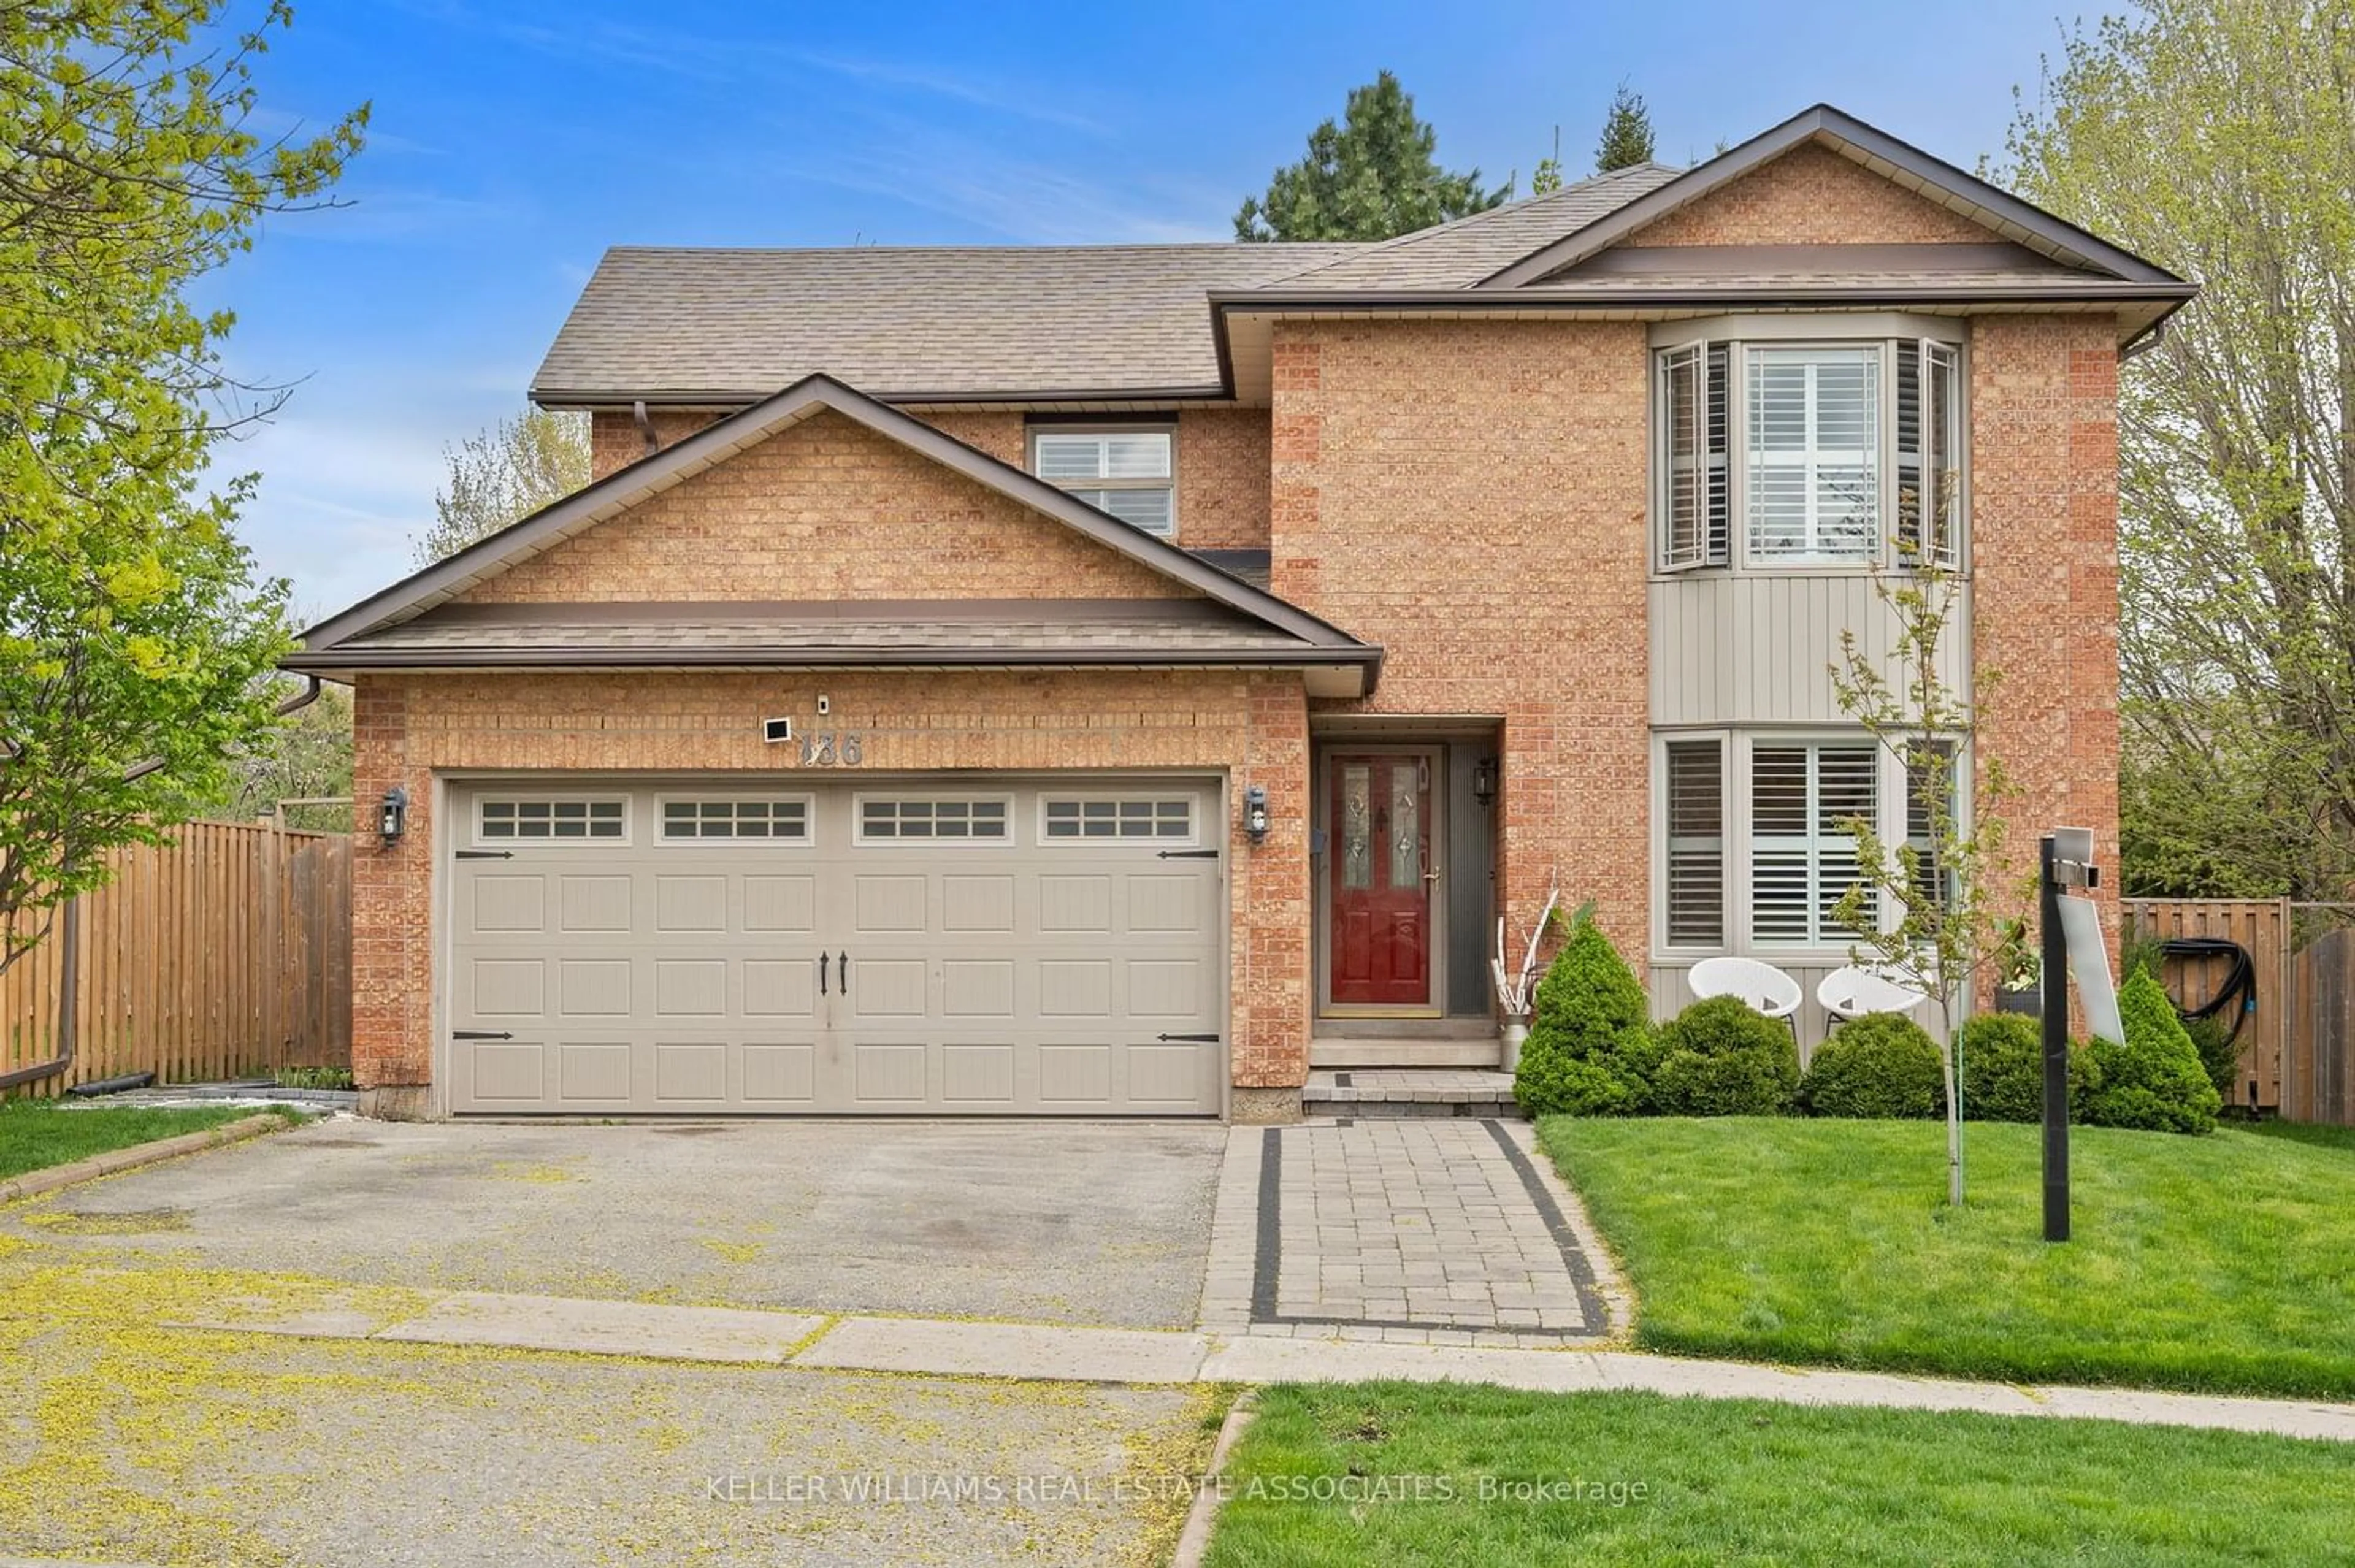 Home with brick exterior material for 136 Meadow Dr, Orangeville Ontario L9W 4J8